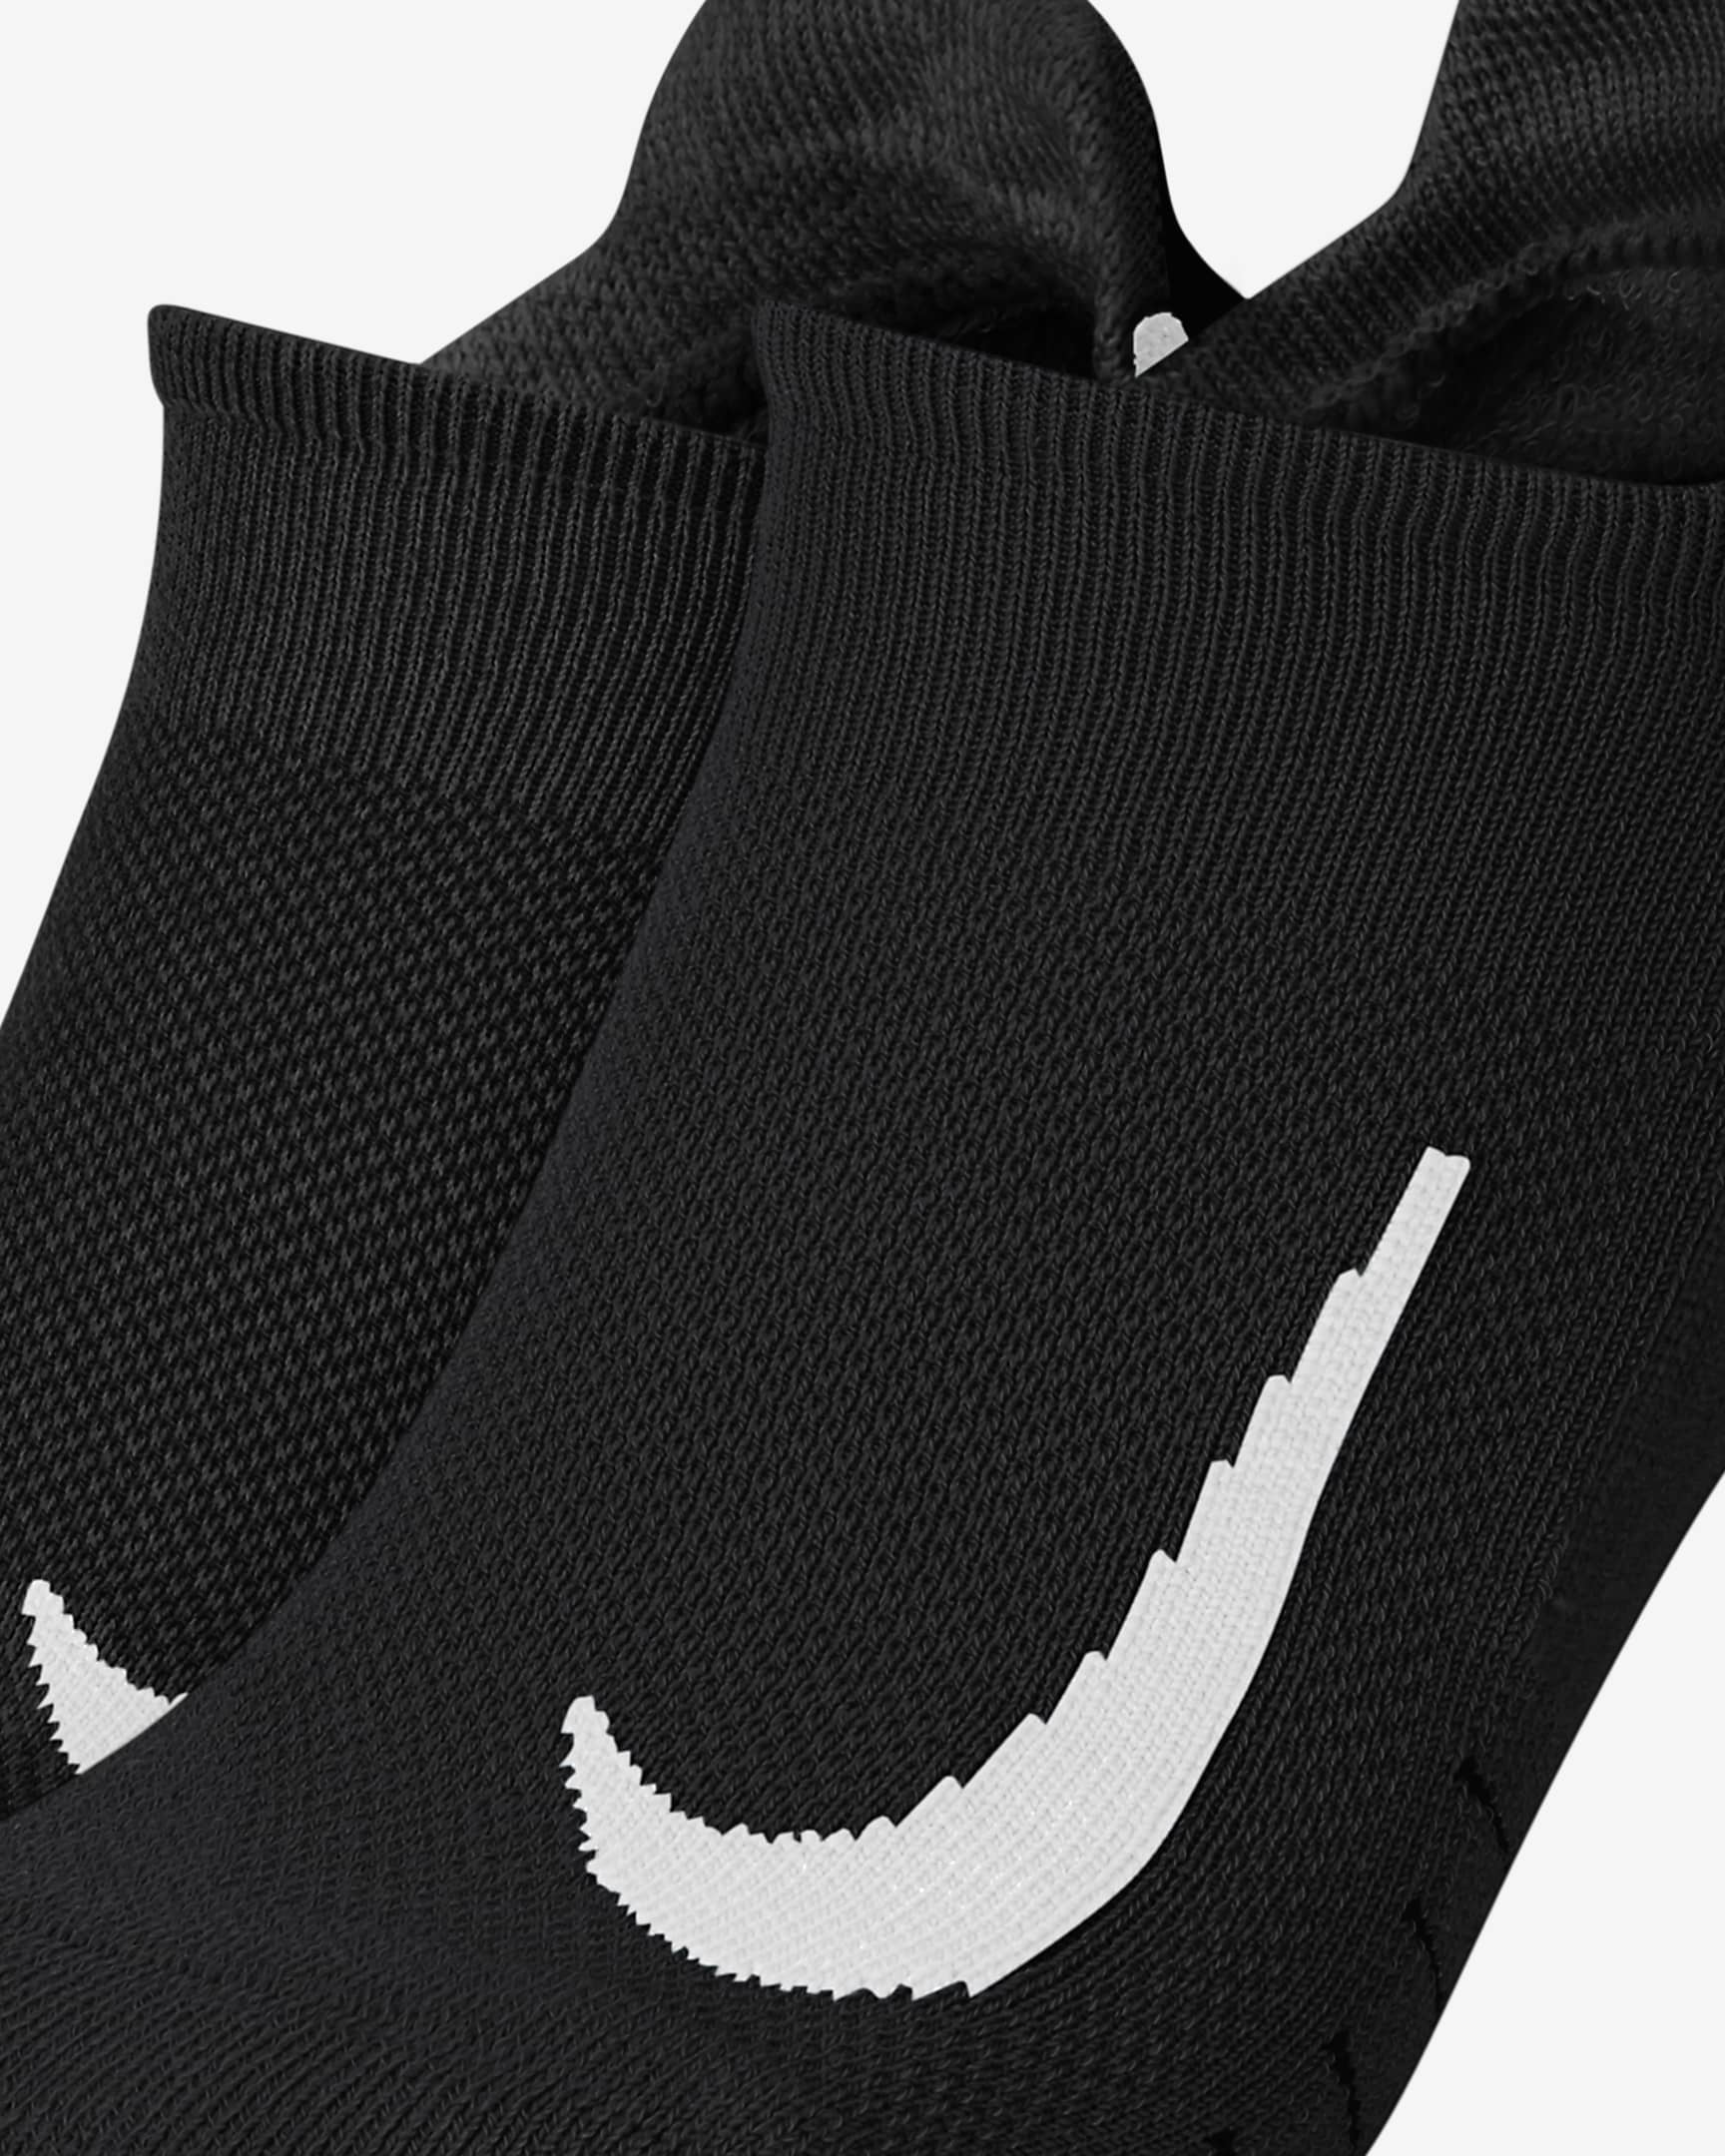 Calcetines invisibles de running Nike Multiplier (2 pares). Nike.com